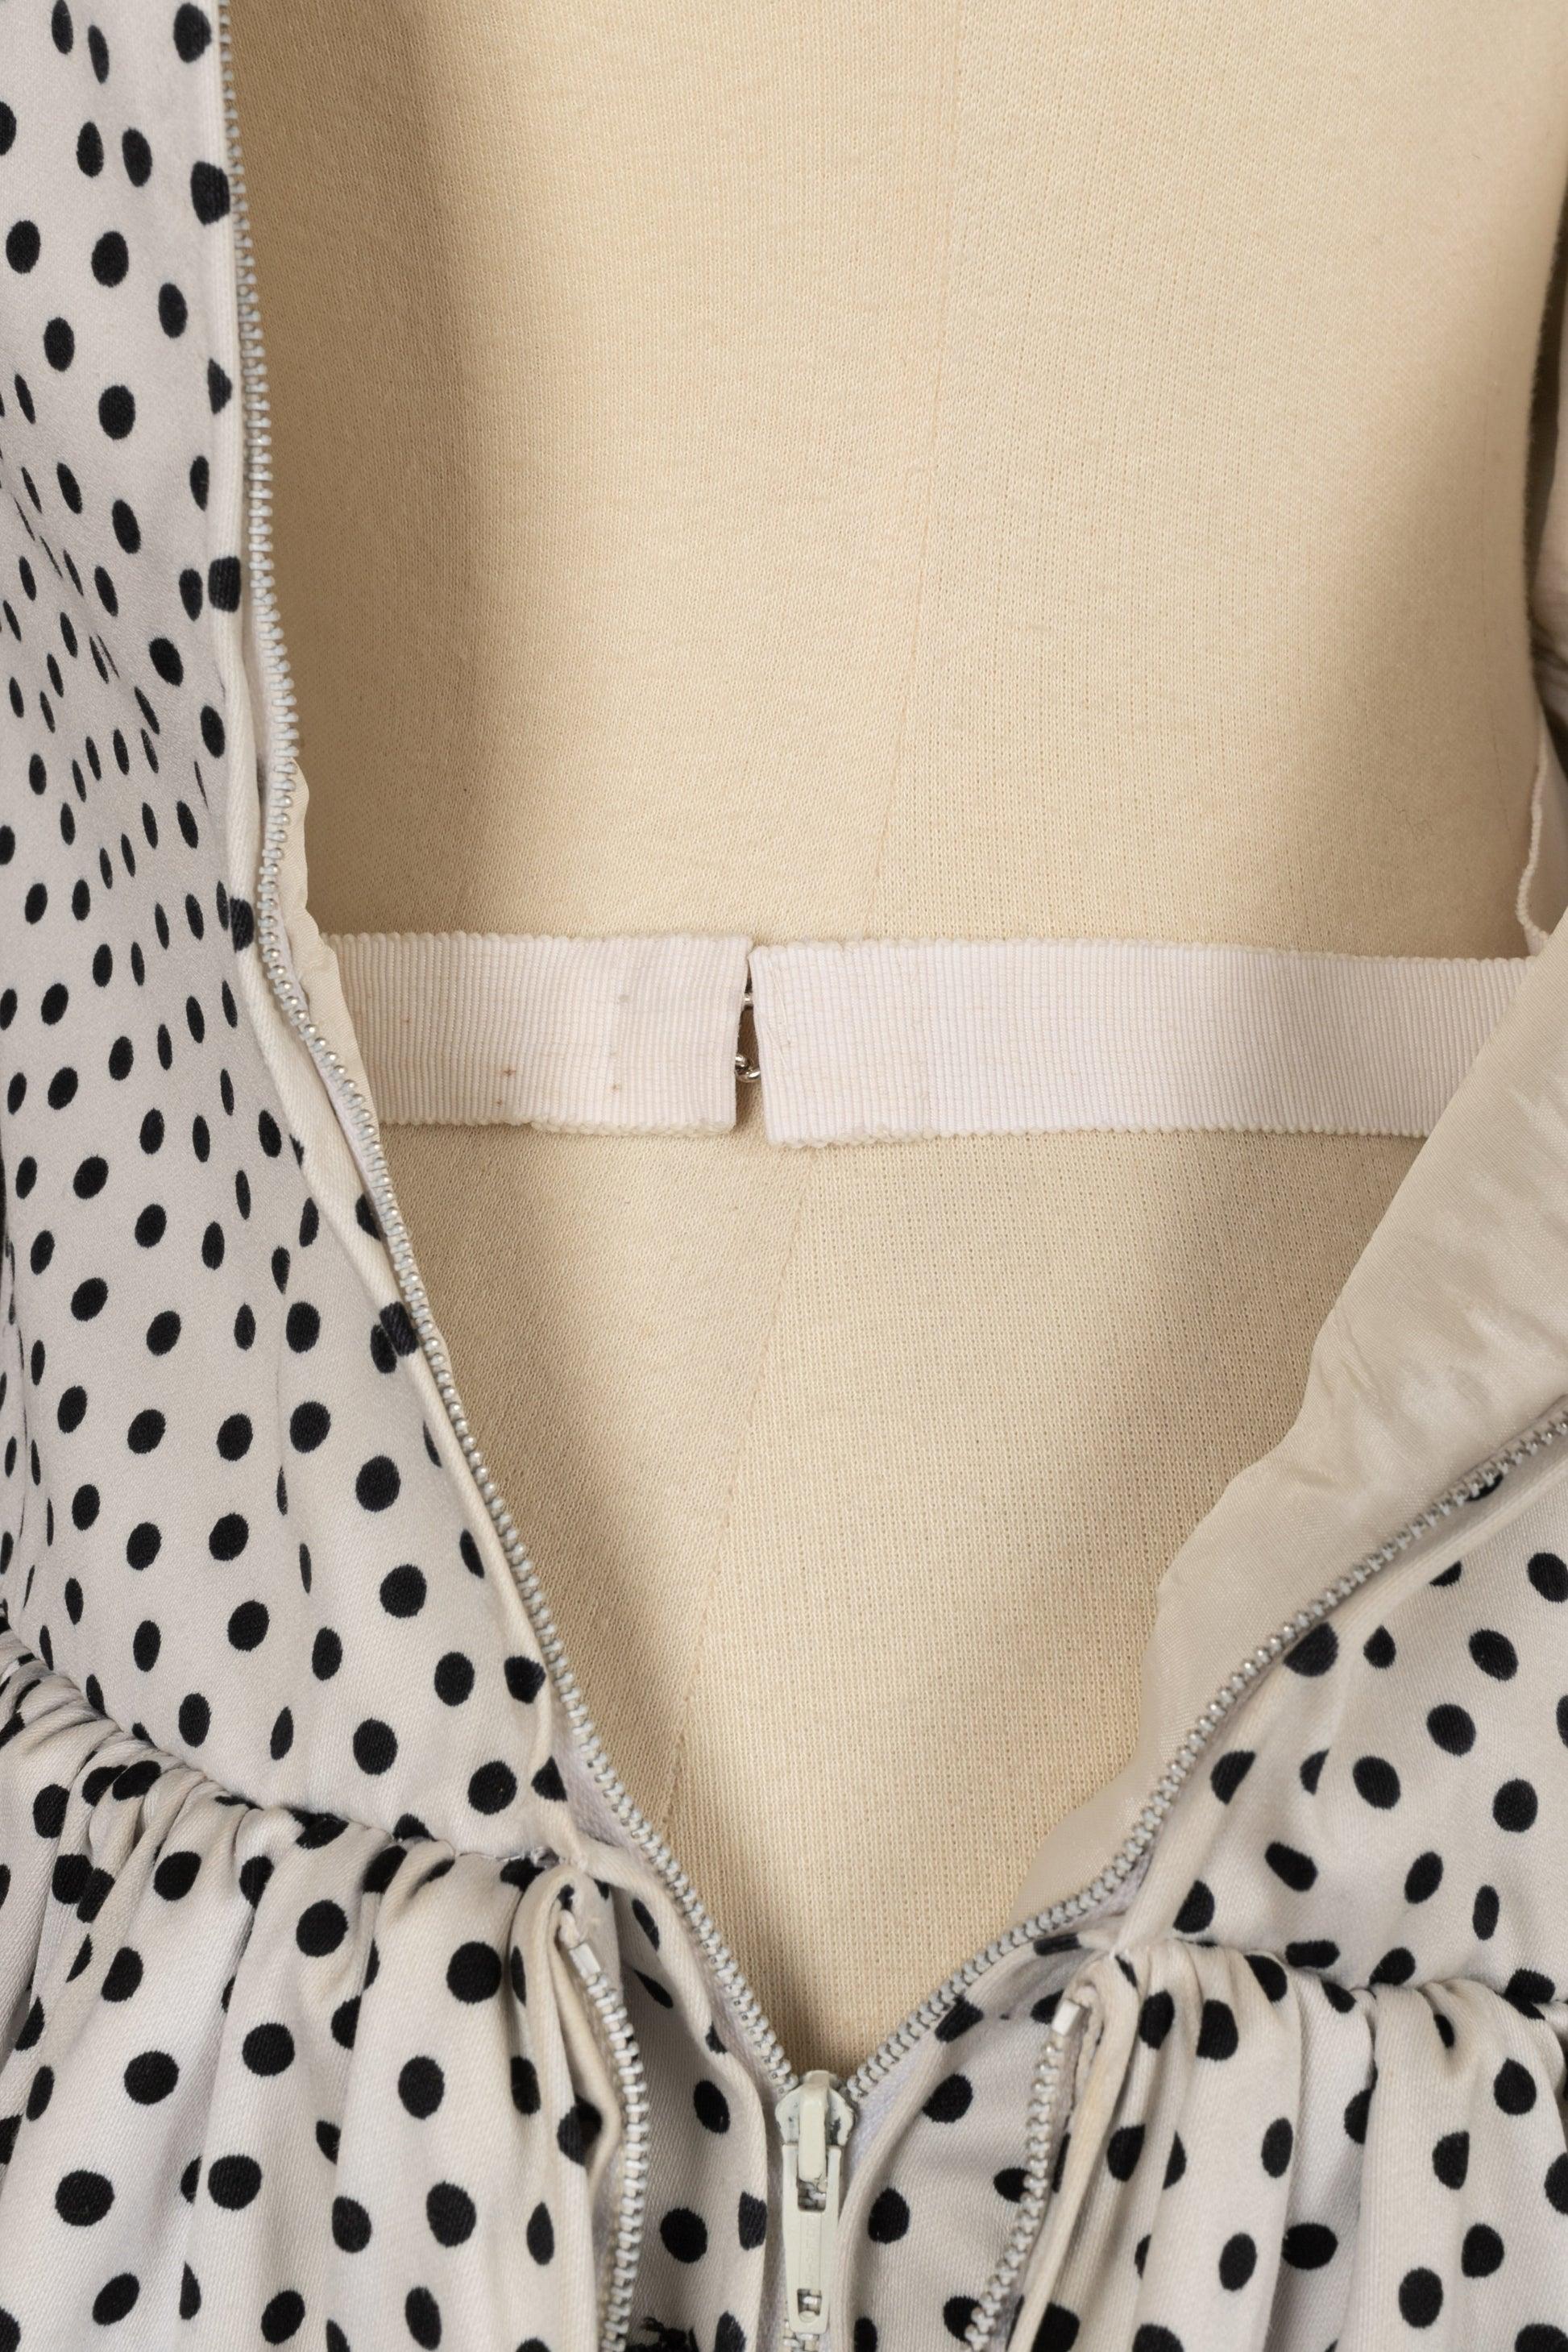 Lanvin Black and White Dotted Cotton Bustier Dress For Sale 4